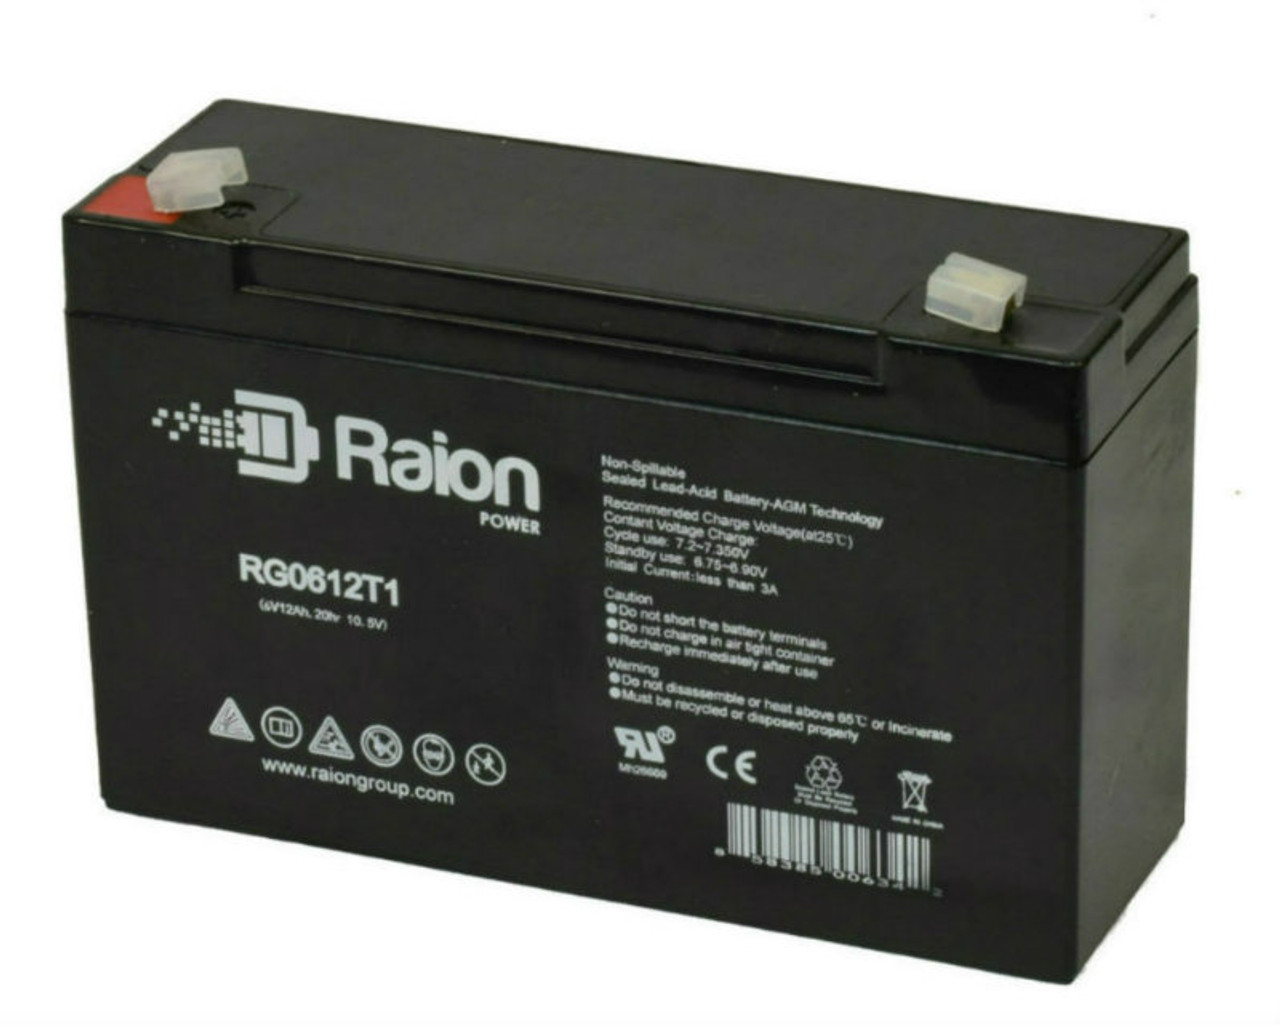 Raion Power RG06120T1 Replacement 6V 12Ah Emergency Light Battery for Holophane M10